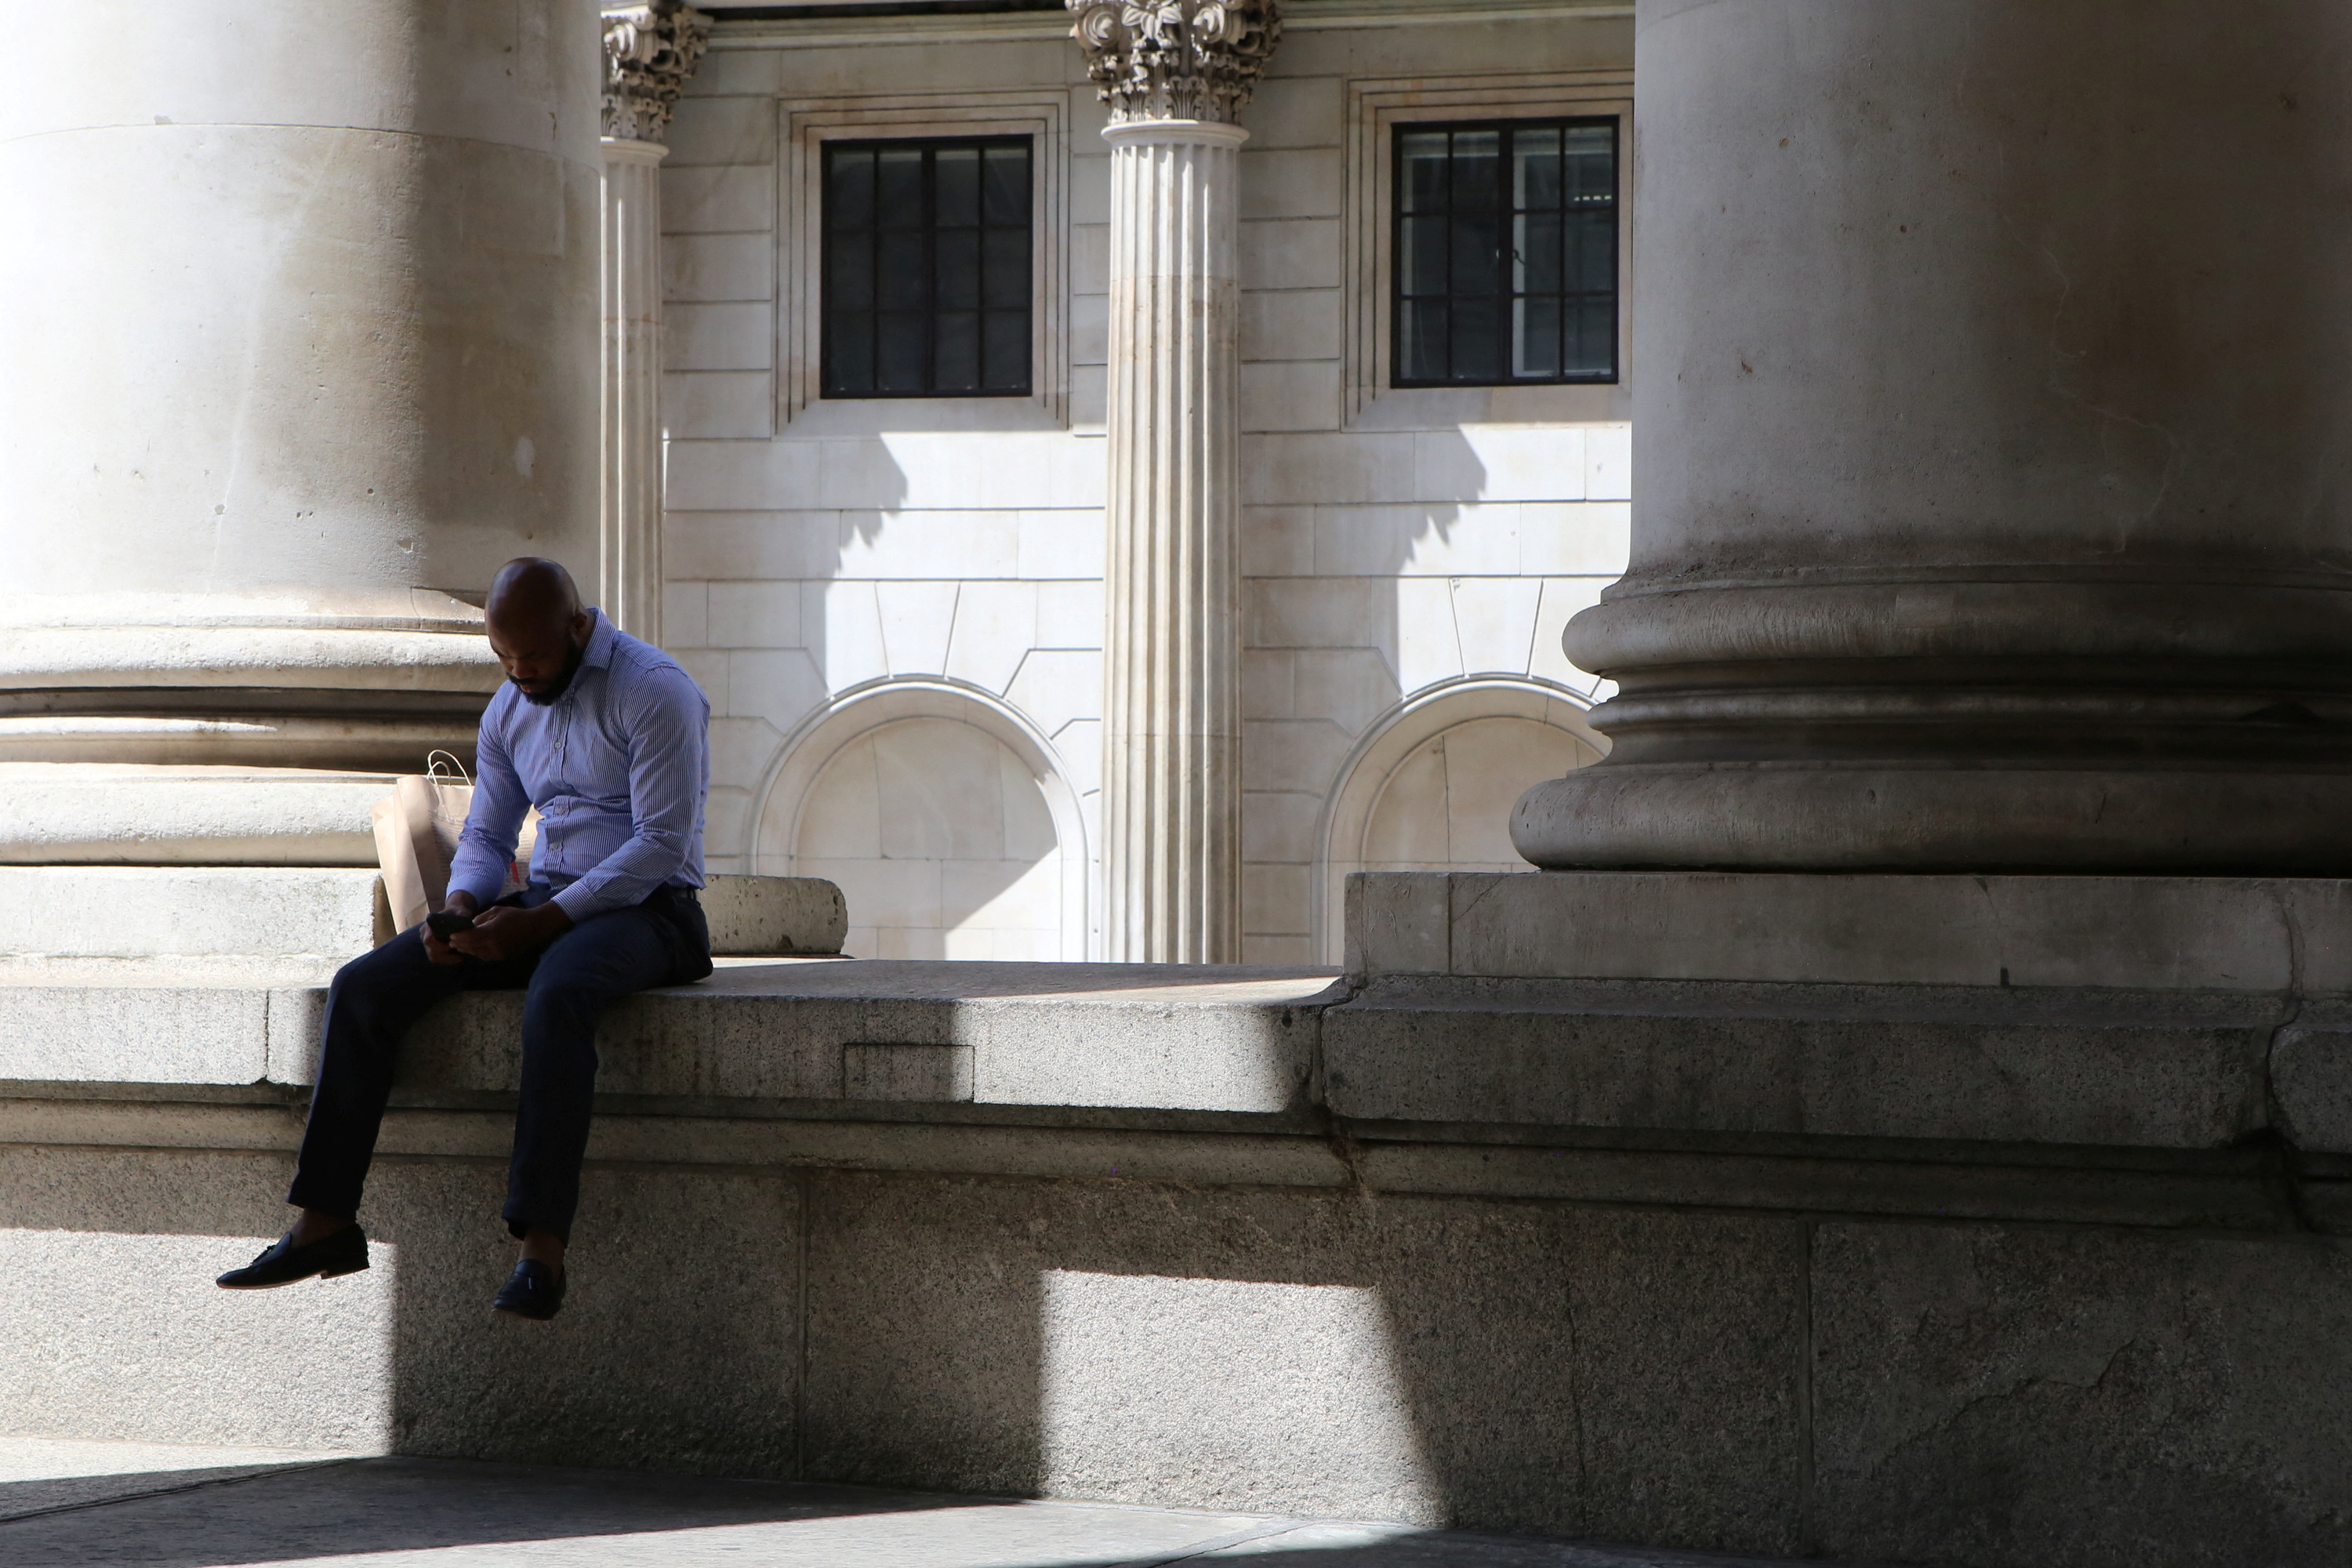 People relax in front of the Bank of England in London's financial district